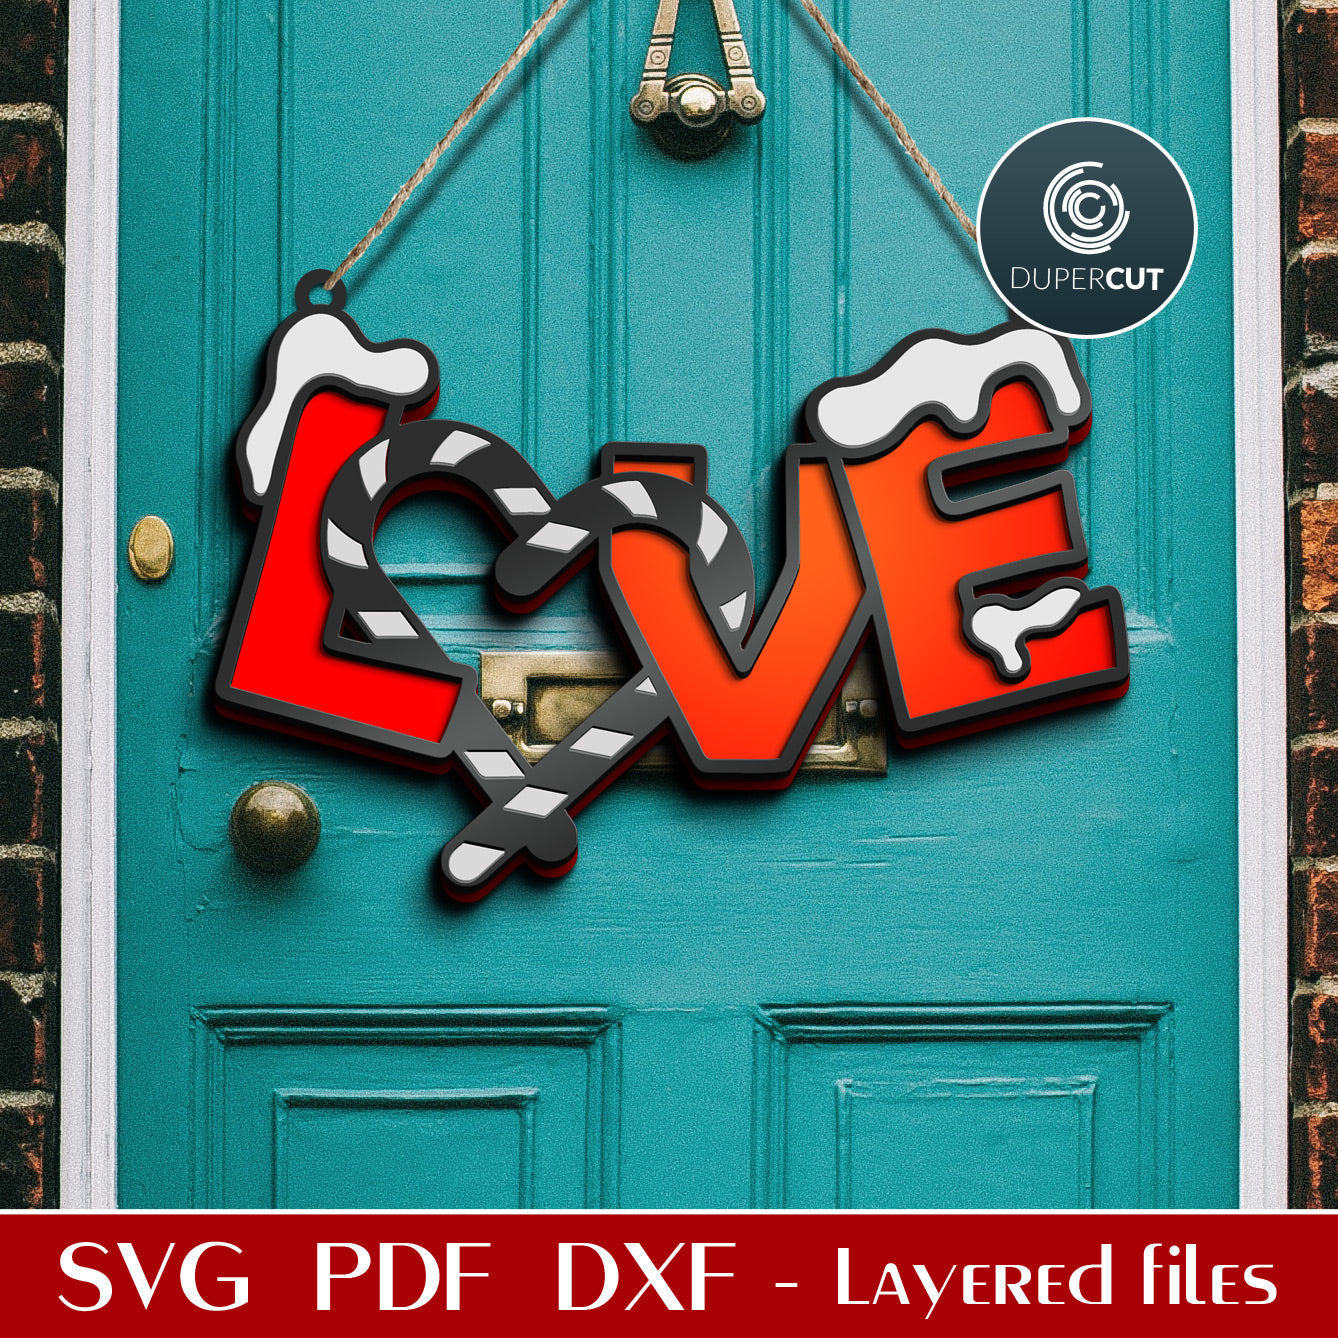 Love holiday Christmas door hanger template - SVG DXF layered cutting files for Glowforge, Cricut, Silhouette Cameo, scroll saw design by DuperCut